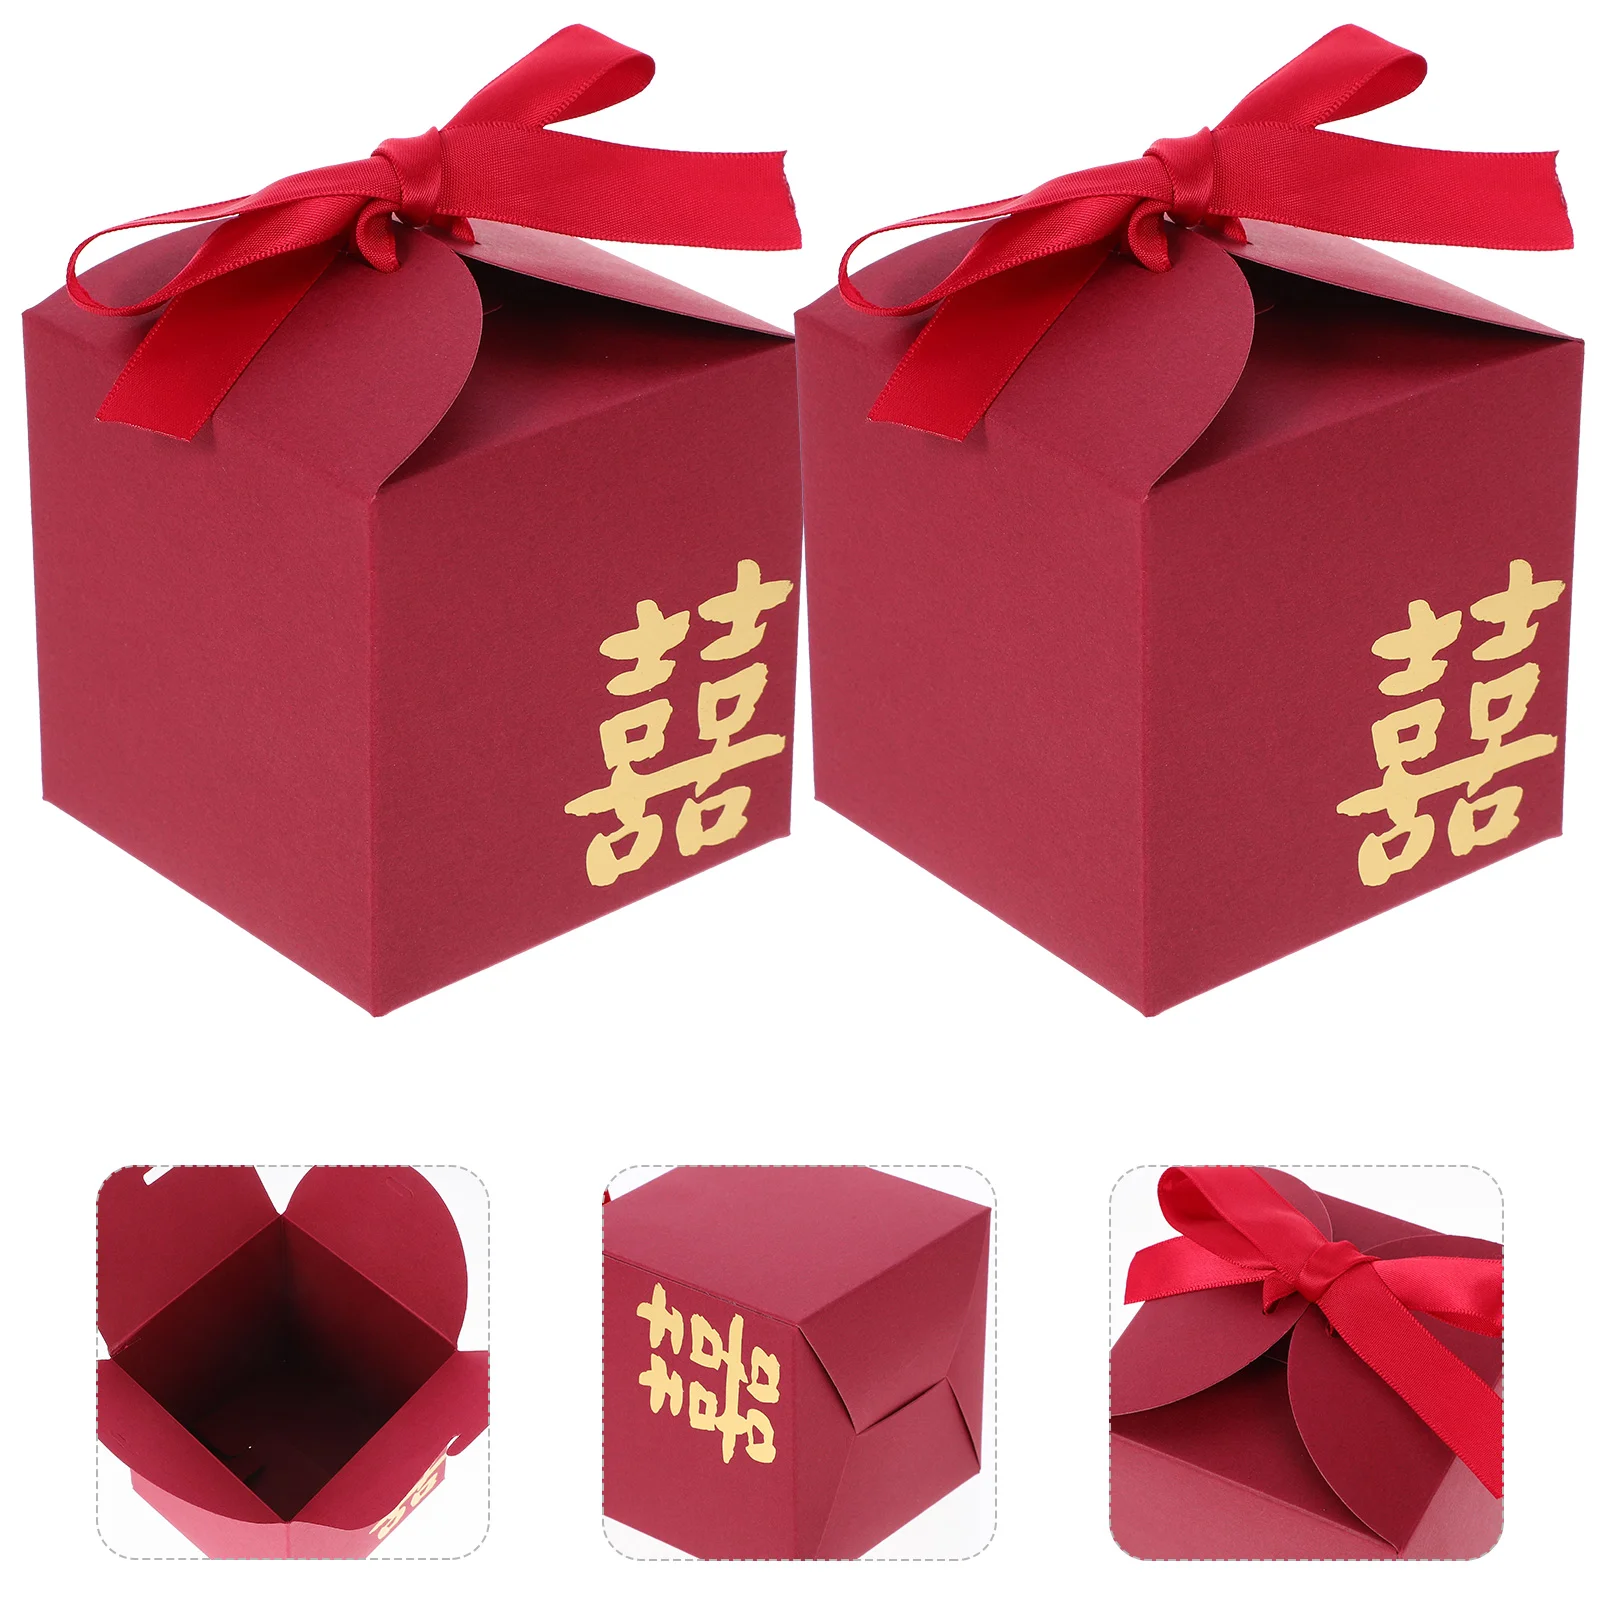 

20 Pcs Candy Box Maid Honour Gifts Wedding Party Supplies Snack Treat Container Paper Bridesmaid Japanese sweets to